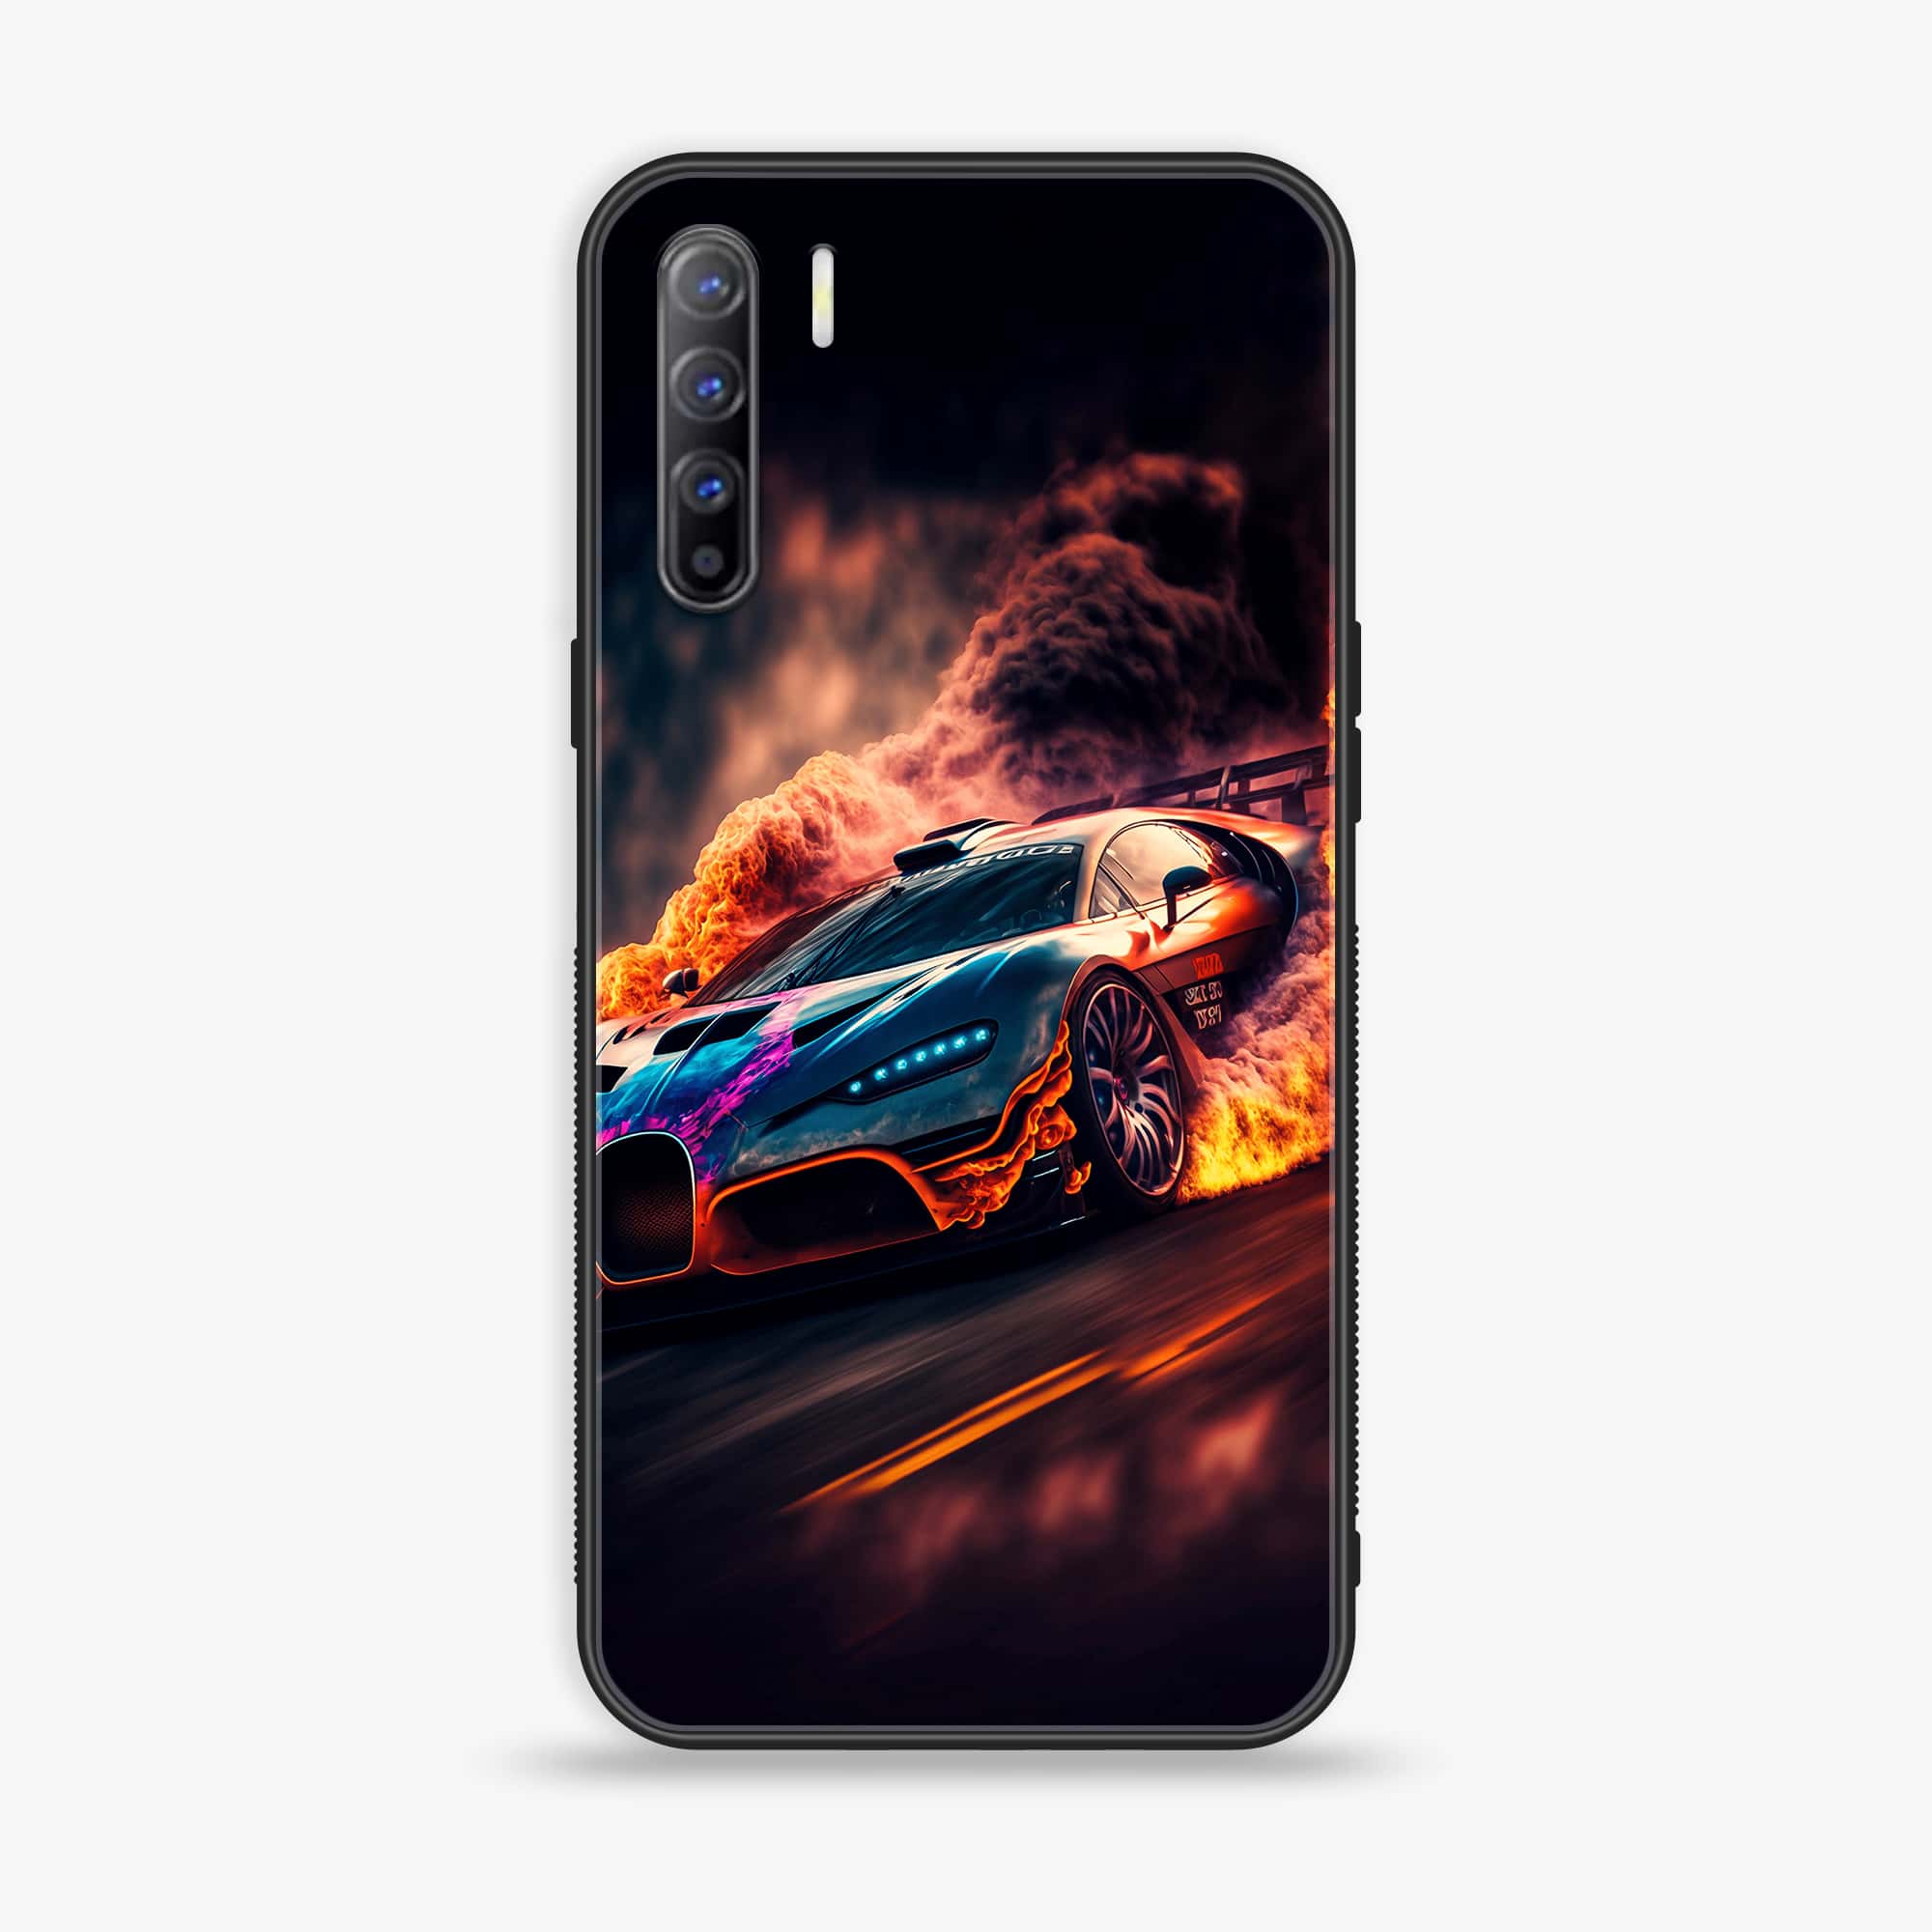 Oppo A91 - Racing Series - Premium Printed Glass soft Bumper shock Proof Case